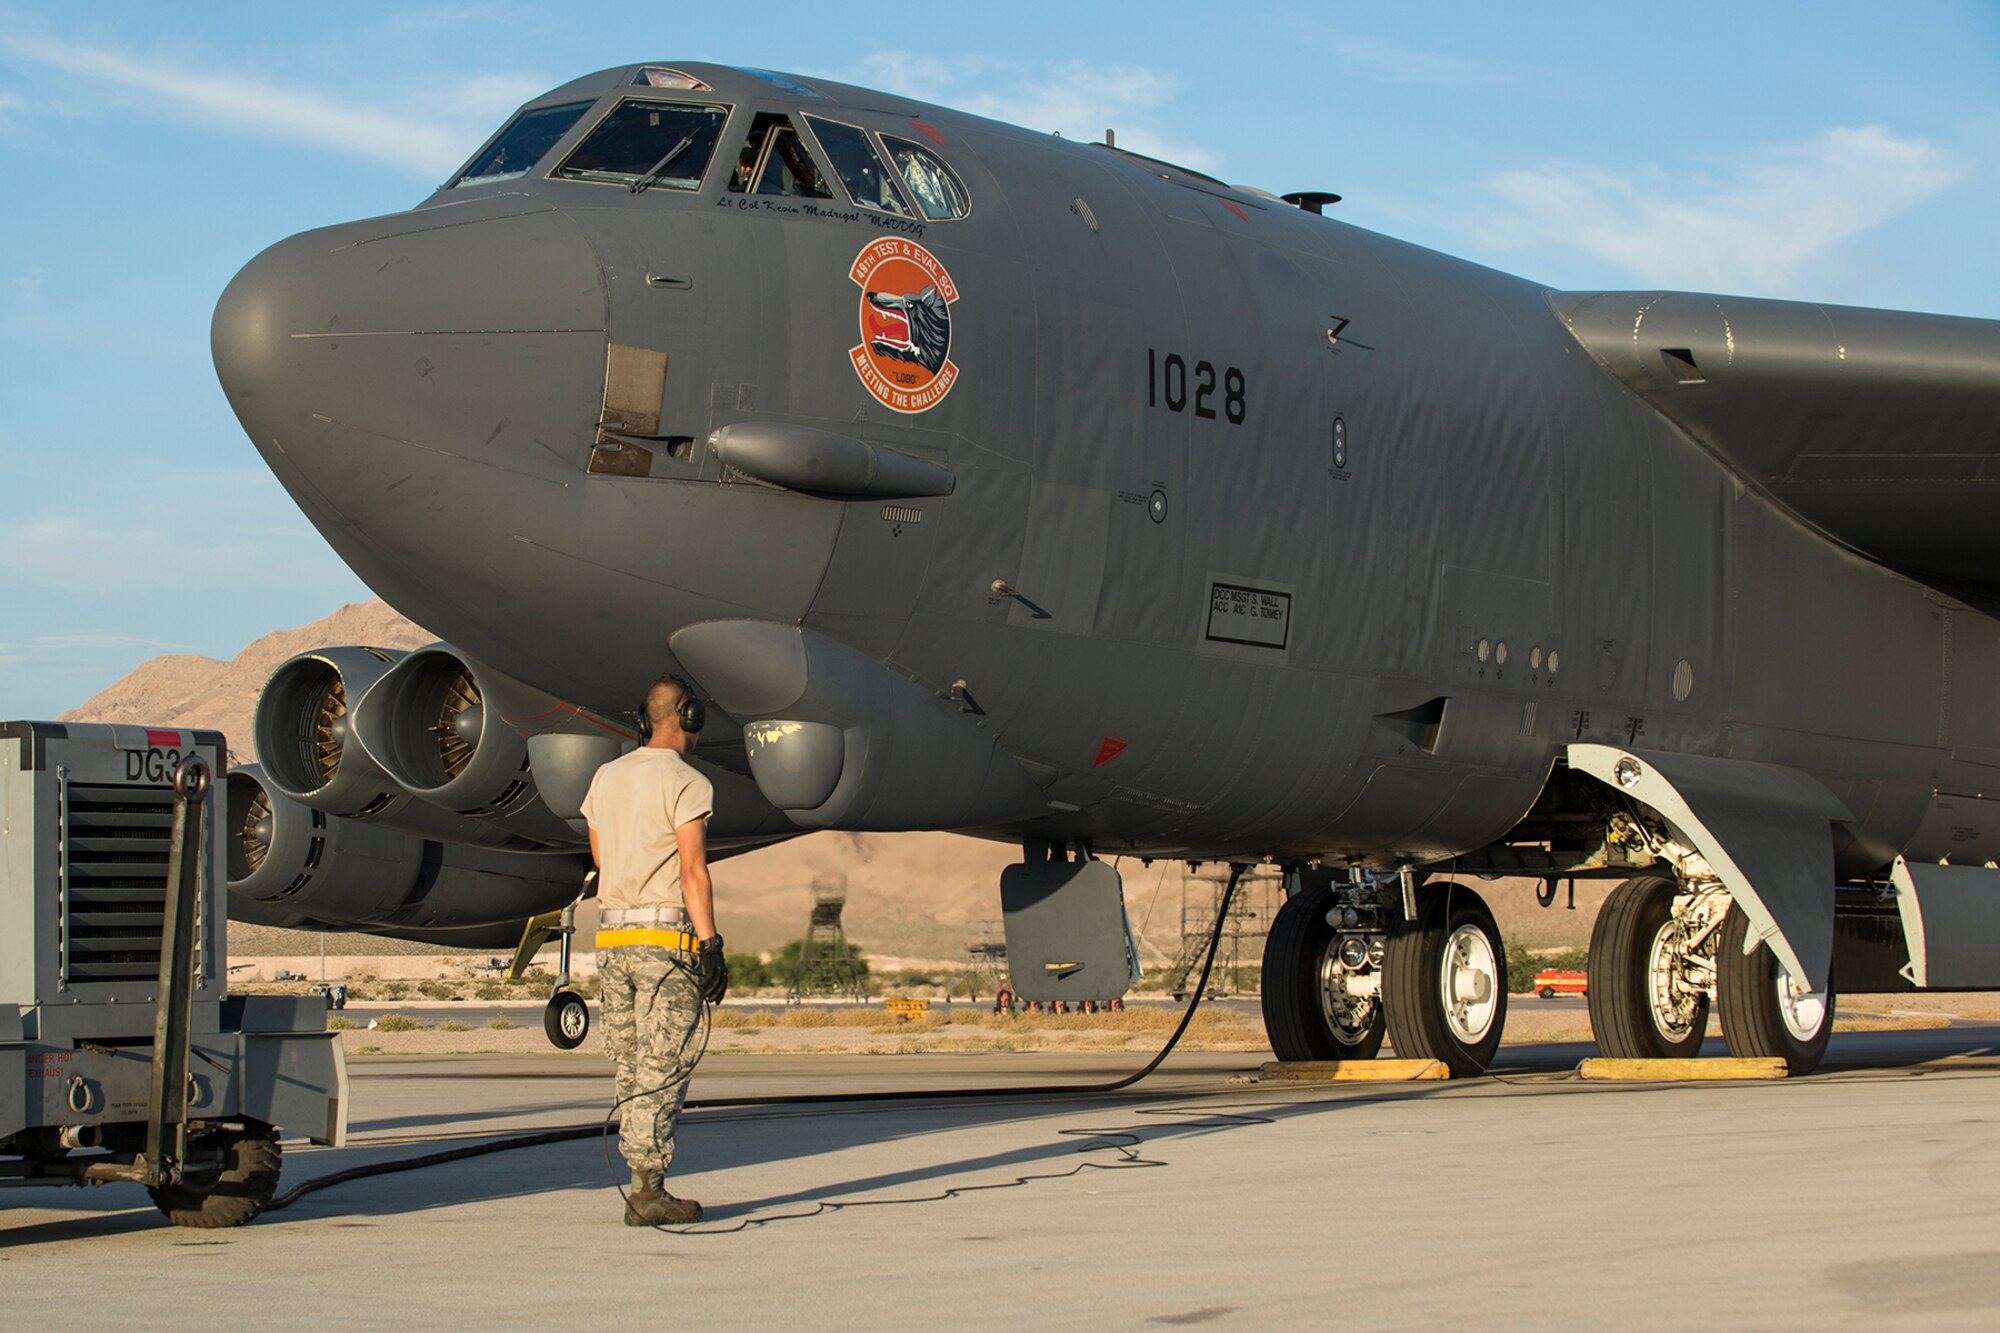 An Air Force Reserve Command B-52H Stratofortress assigned to the 307th Bomb Wing (BW) at Barksdale Air Force Base (AFB), La., prepares to taxi for a mission on June 8, 2016, Nellis Air Force Base, Nev. The B-52 is at Nellis supporting the 340th Weapons Squadron. (U.S. Air Force photo by Master Sgt. Greg Steele/Released)